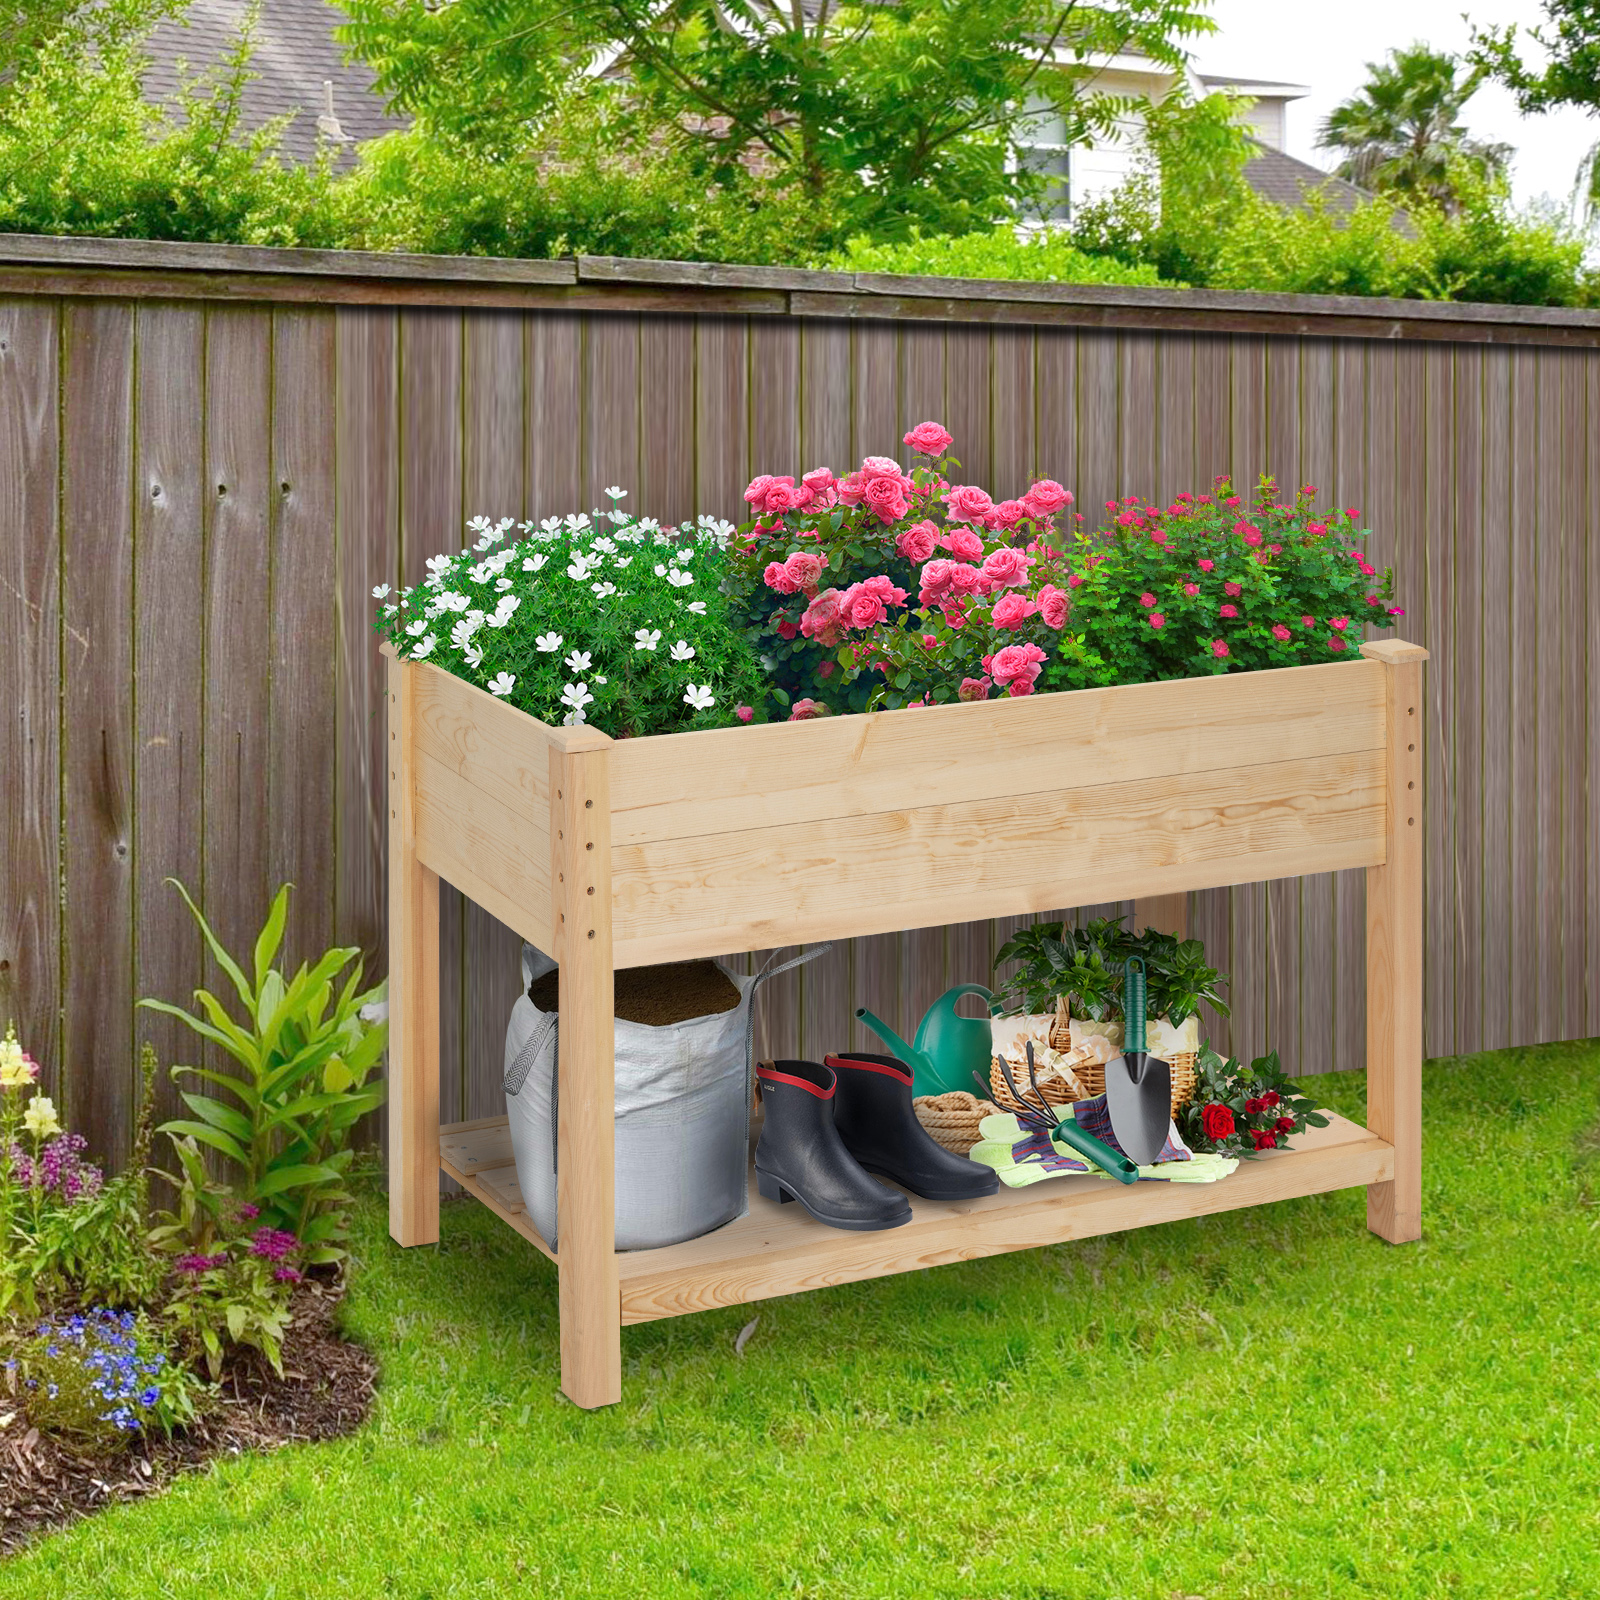 KingSo Raised Garden Bed 4FT Elevated Wooden Planter Boxes Kit Outdoor with Legs Garden Grow Box with Shelves for Vegetable Flower Patio